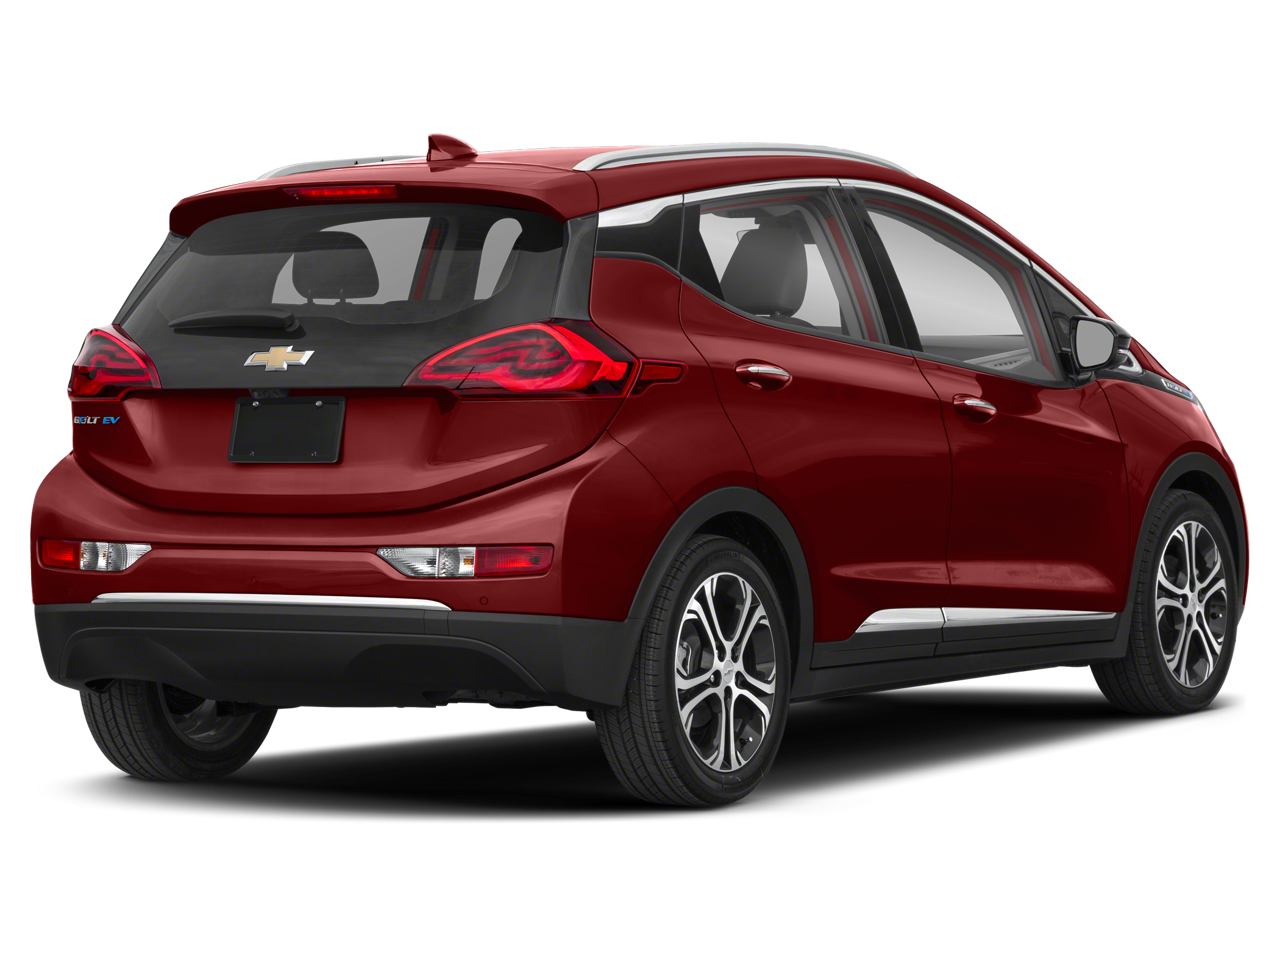 Used 2021 Chevrolet Bolt EV Premier with VIN 1G1FZ6S08M4109409 for sale in Upland, CA